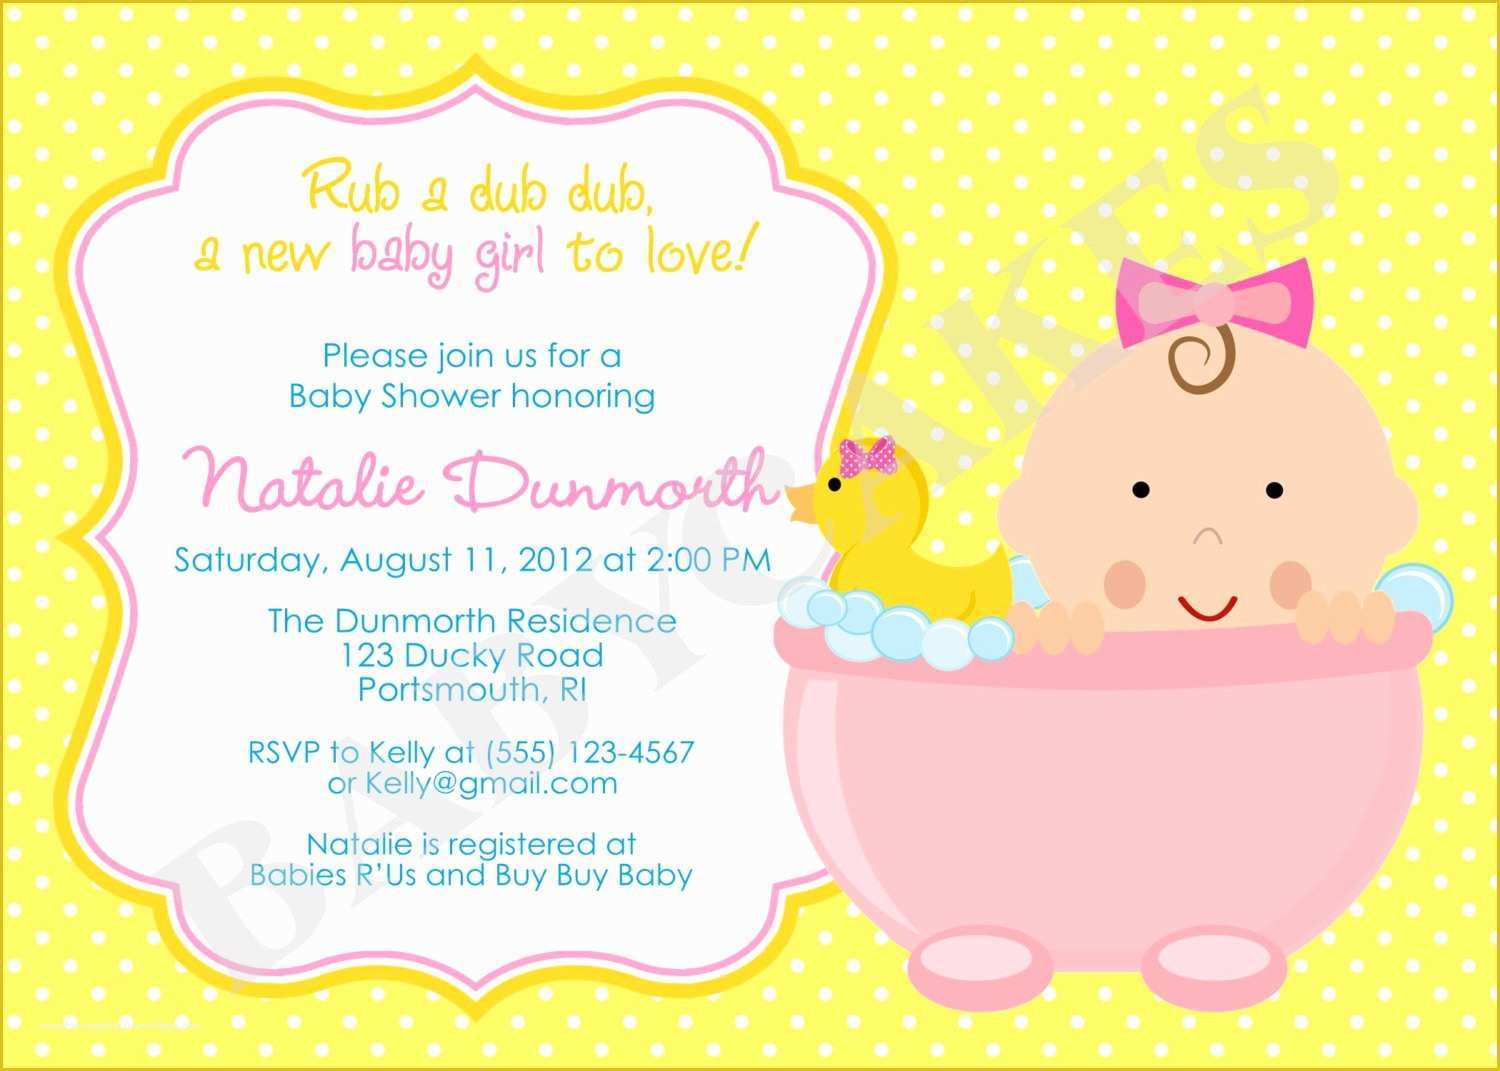 Free Online Baby Shower Invitations Templates Of How to Plan Rubber Ducky Baby Shower Ideas